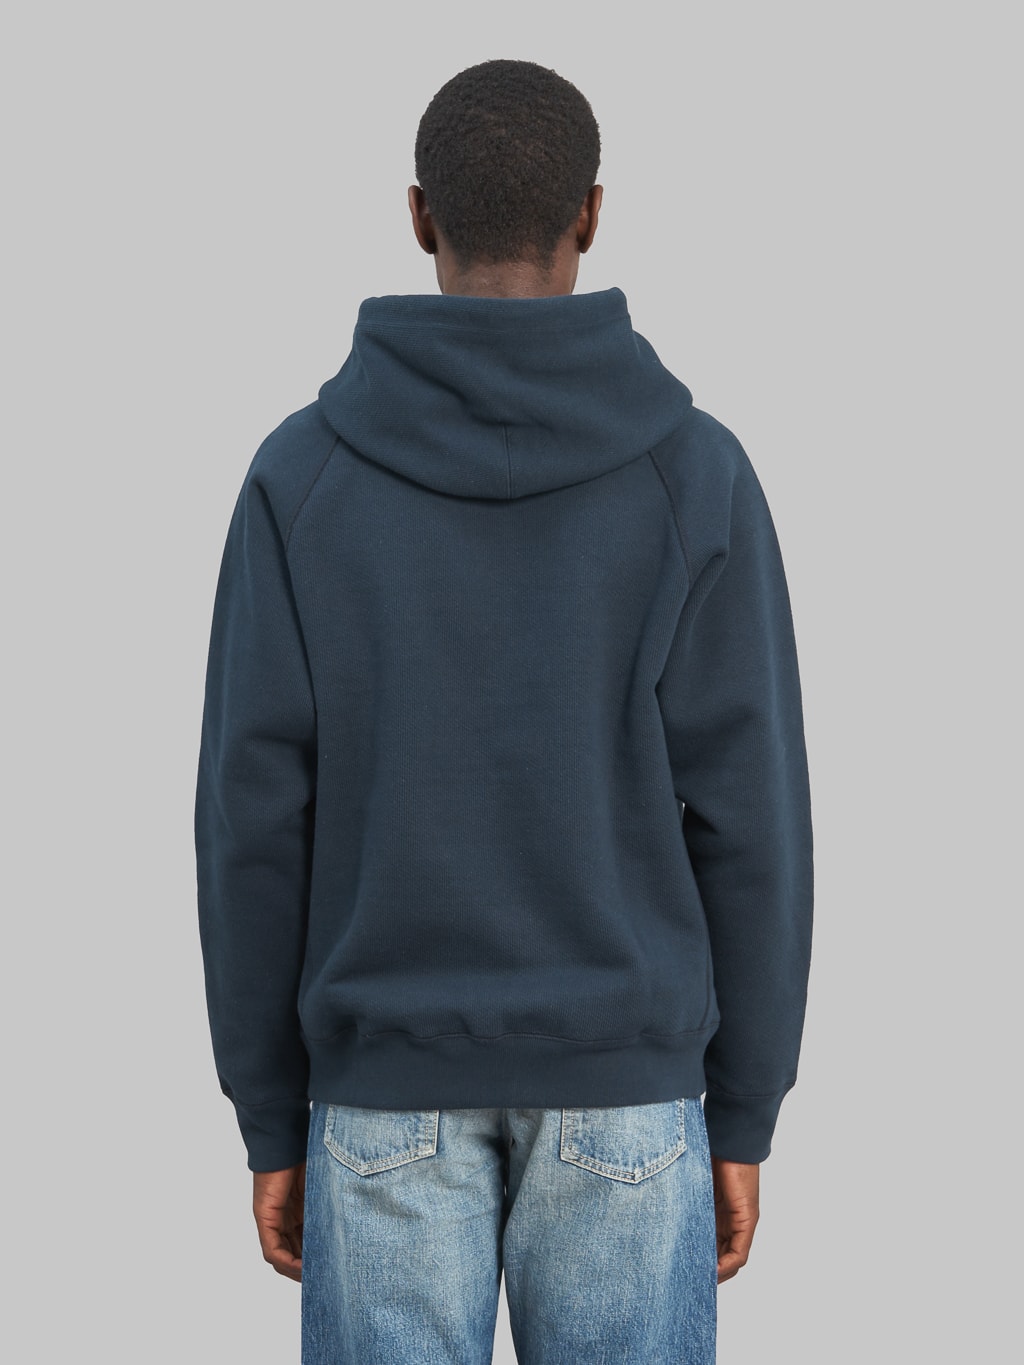 Wonder Looper Pullover Hoodie Double Heavyweight French Terry navy athletic back look